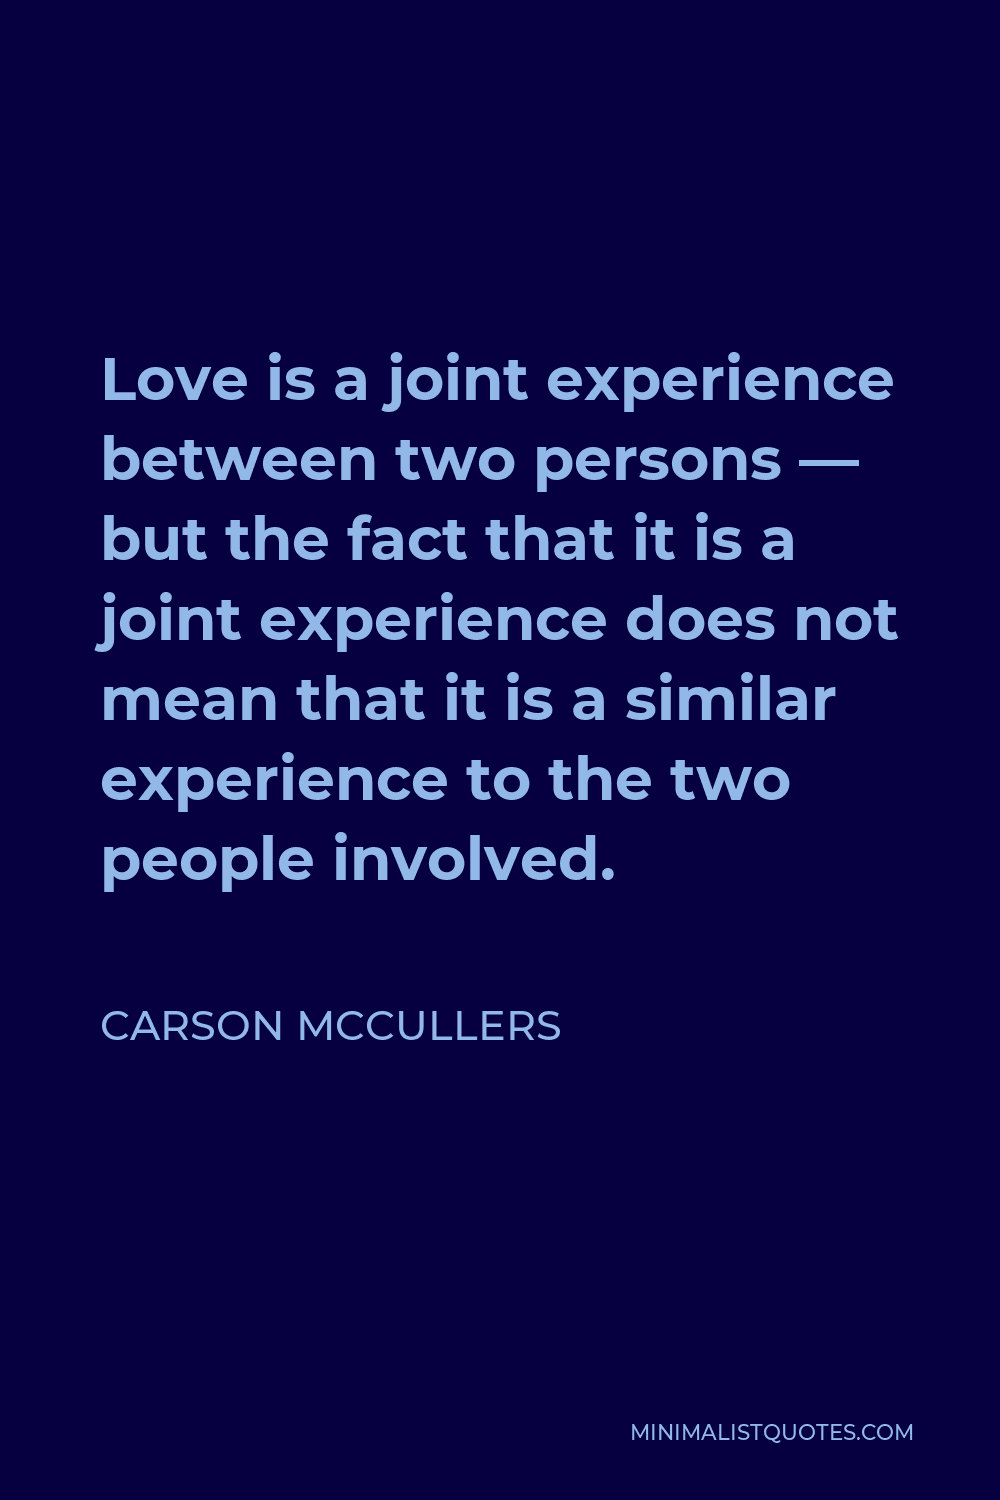 Carson McCullers Quote - Love is a joint experience between two persons — but the fact that it is a joint experience does not mean that it is a similar experience to the two people involved.